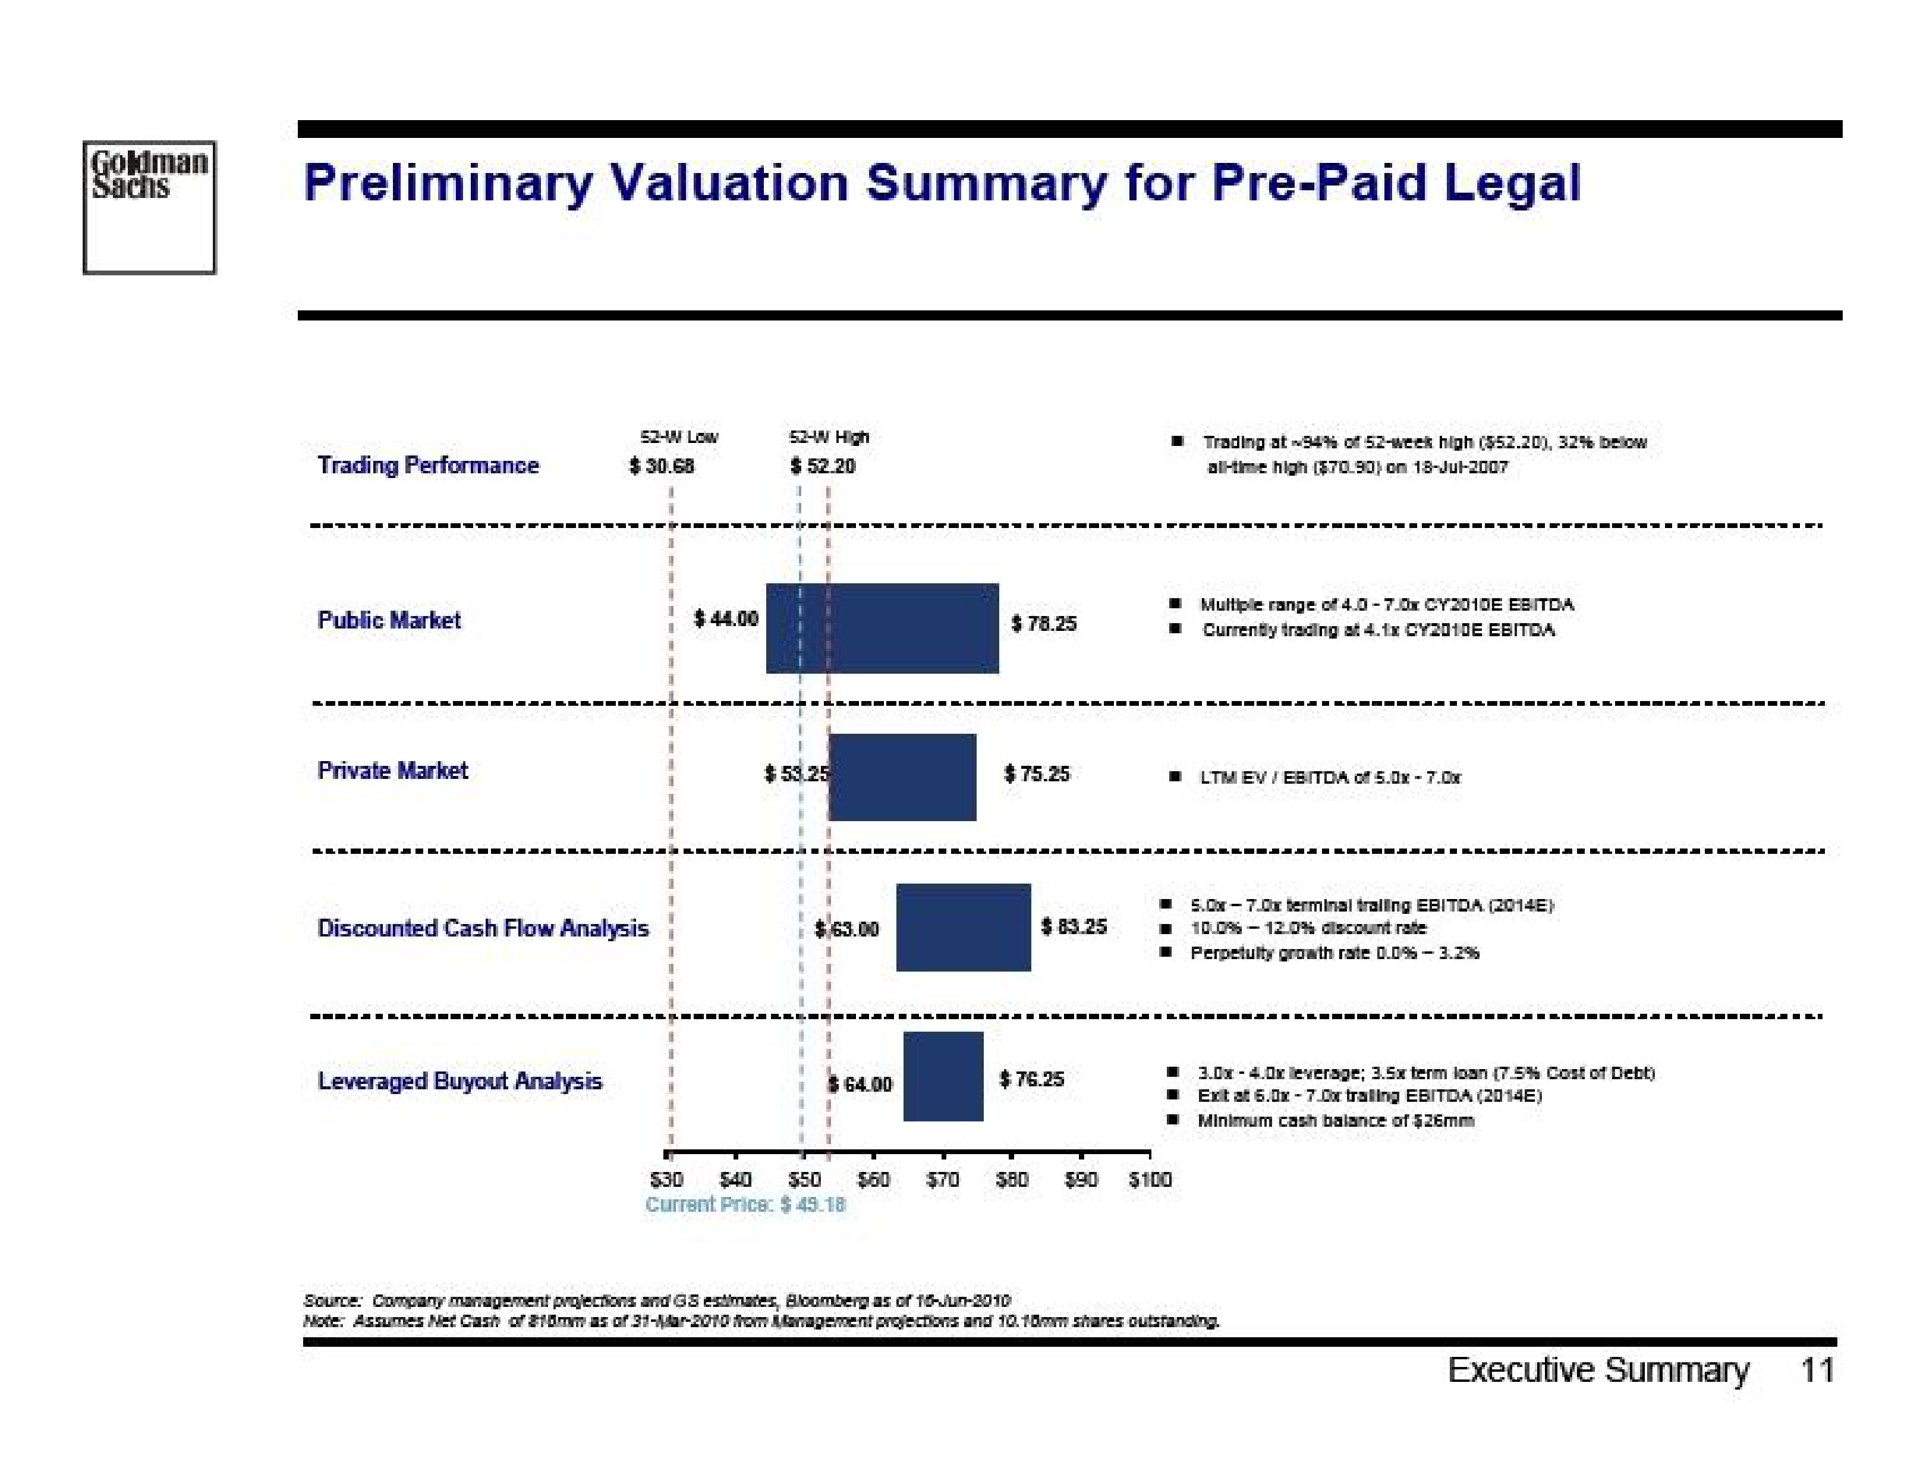 preliminary valuation summary for paid legal | Goldman Sachs